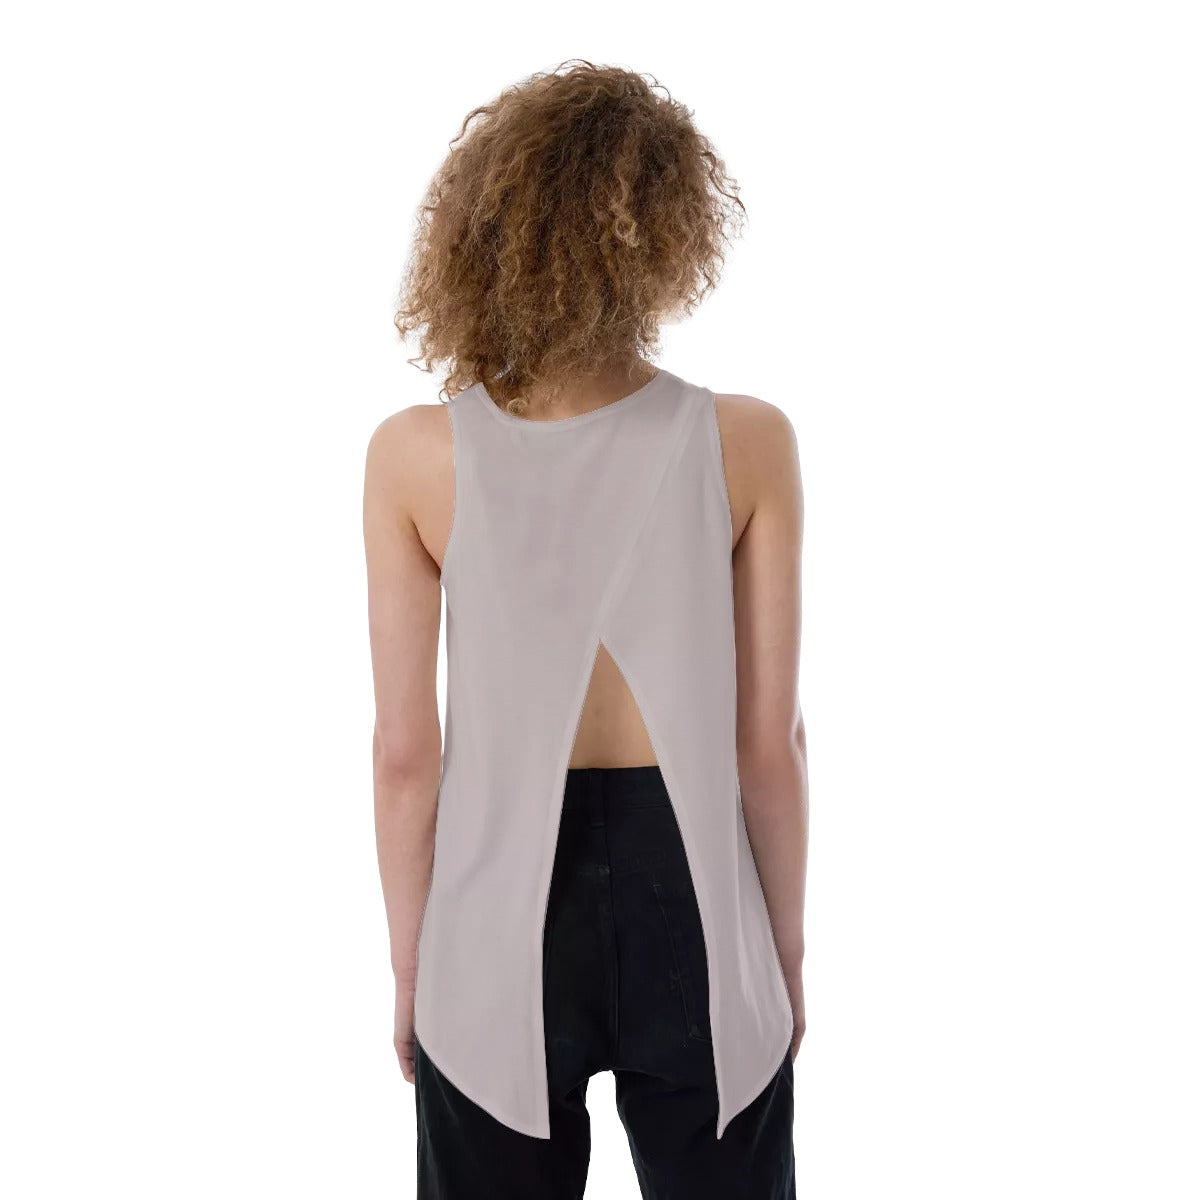 Loose Yoga Wear - Women's Loose Tank Yoga Top - Personal Hour for Yoga and Meditations 